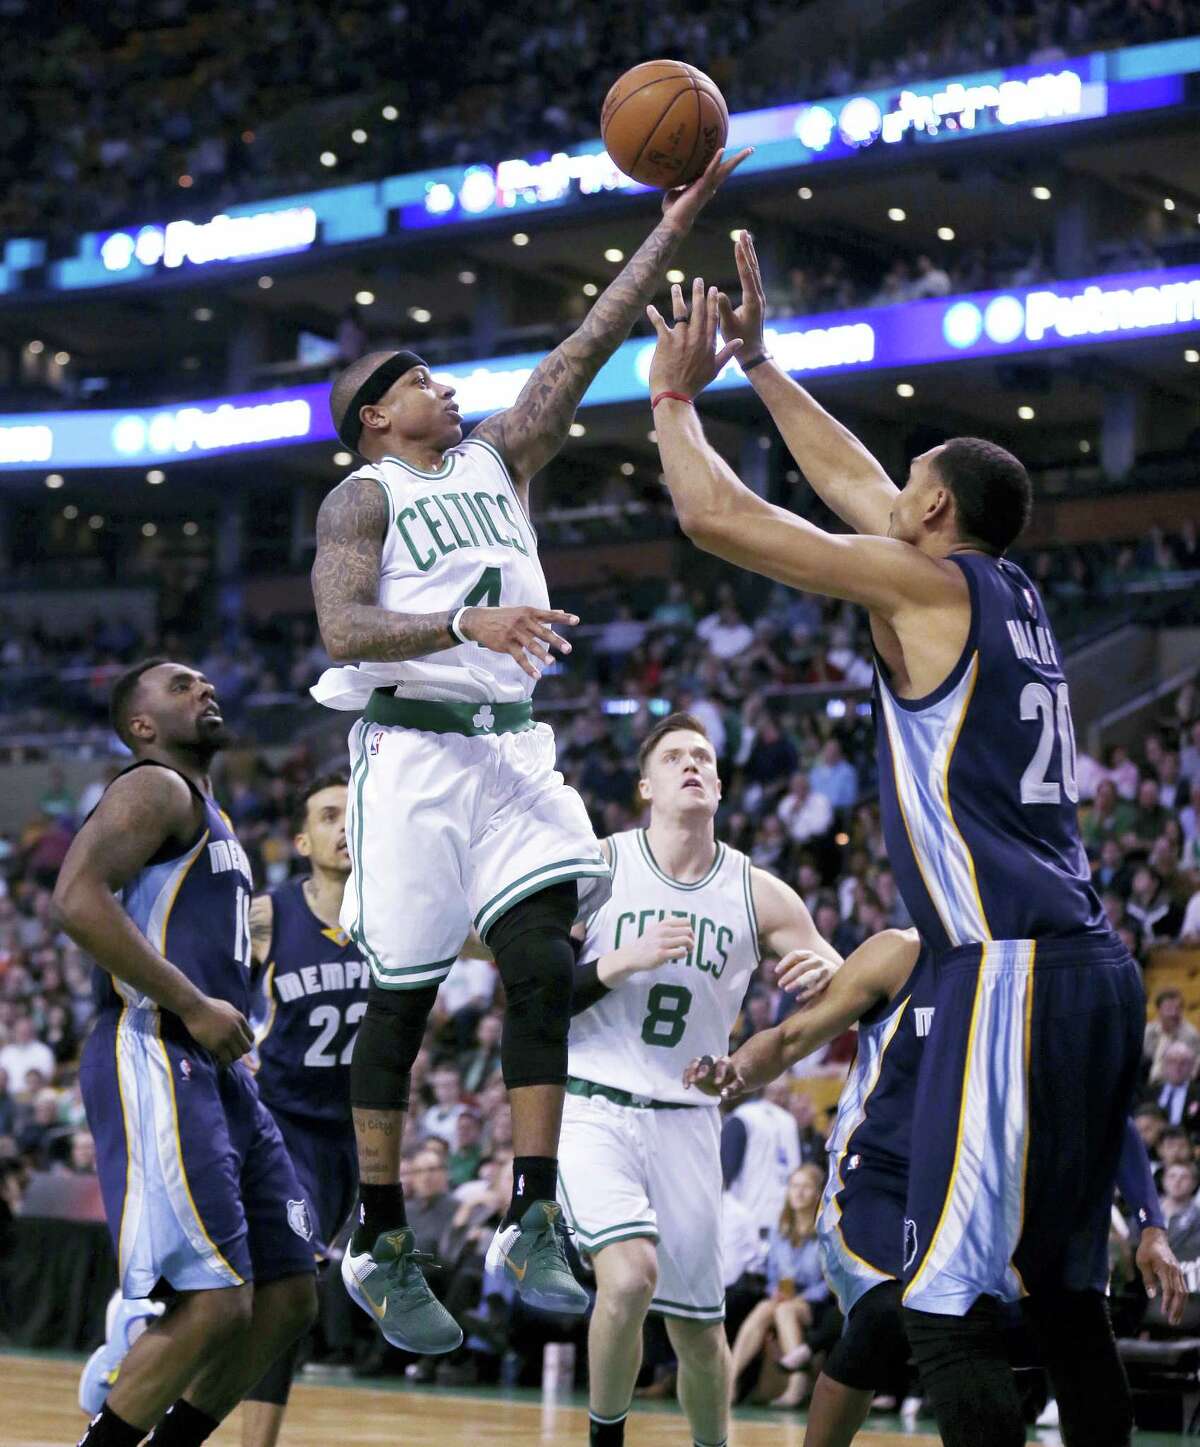 Boston Celtics guard Isaiah Thomas (4) drives to the basket against the Memphis Grizzlies during the first quarter Wednesday in Boston. Thomas scored 22 points in the Celtics 116-96 win.